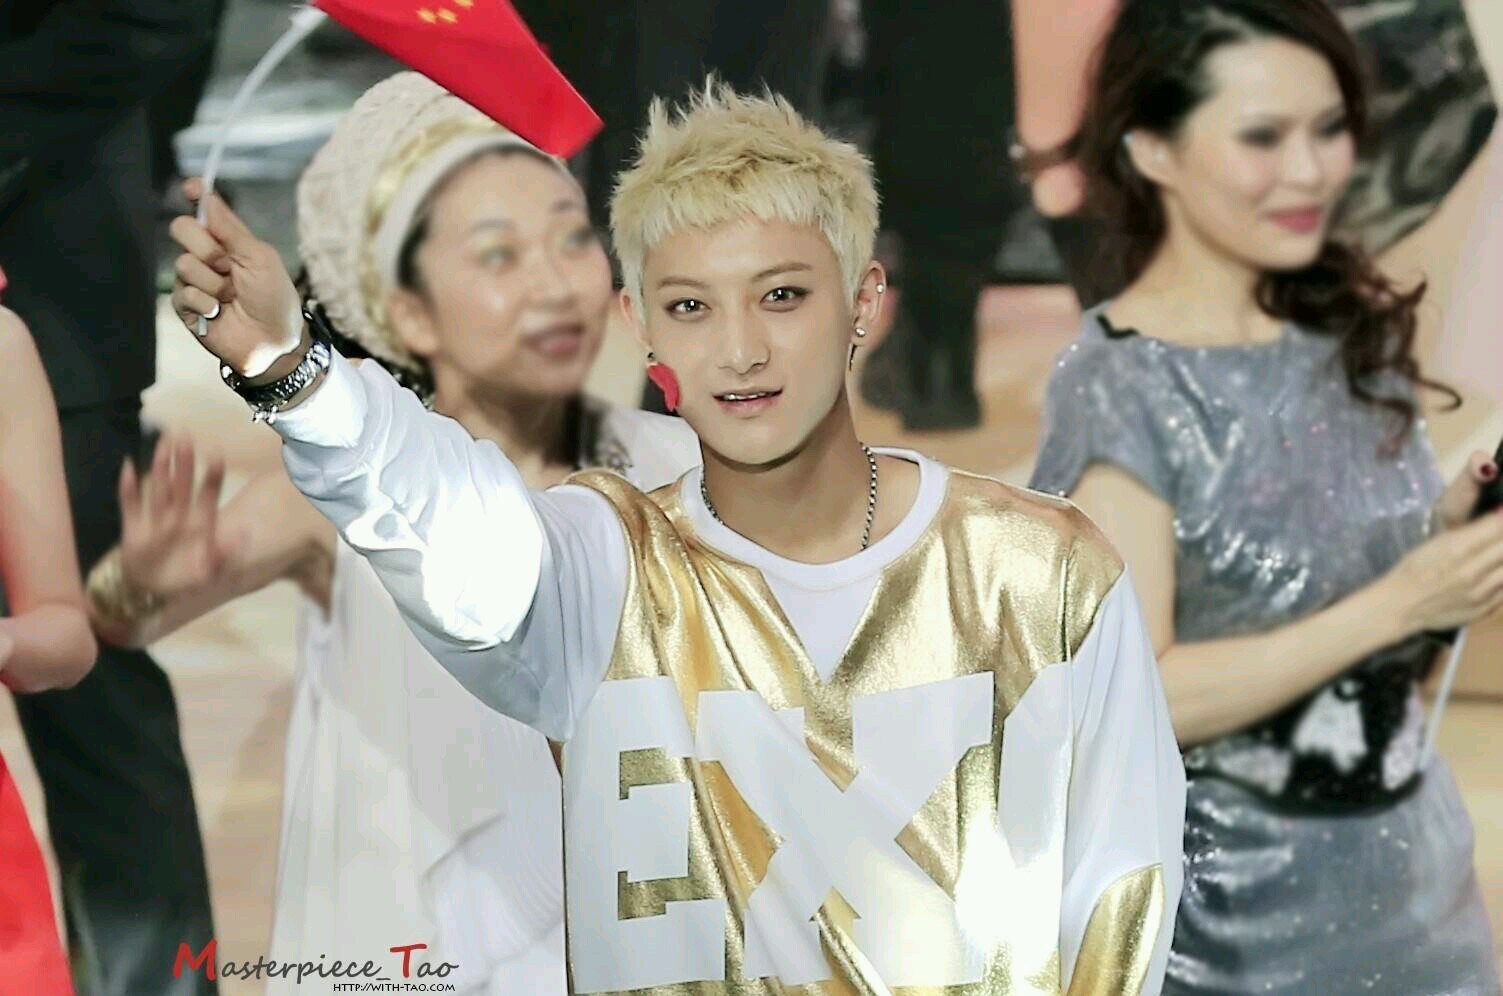 Here is EXO-M member Tao's Chinese fansite Masterpiece.